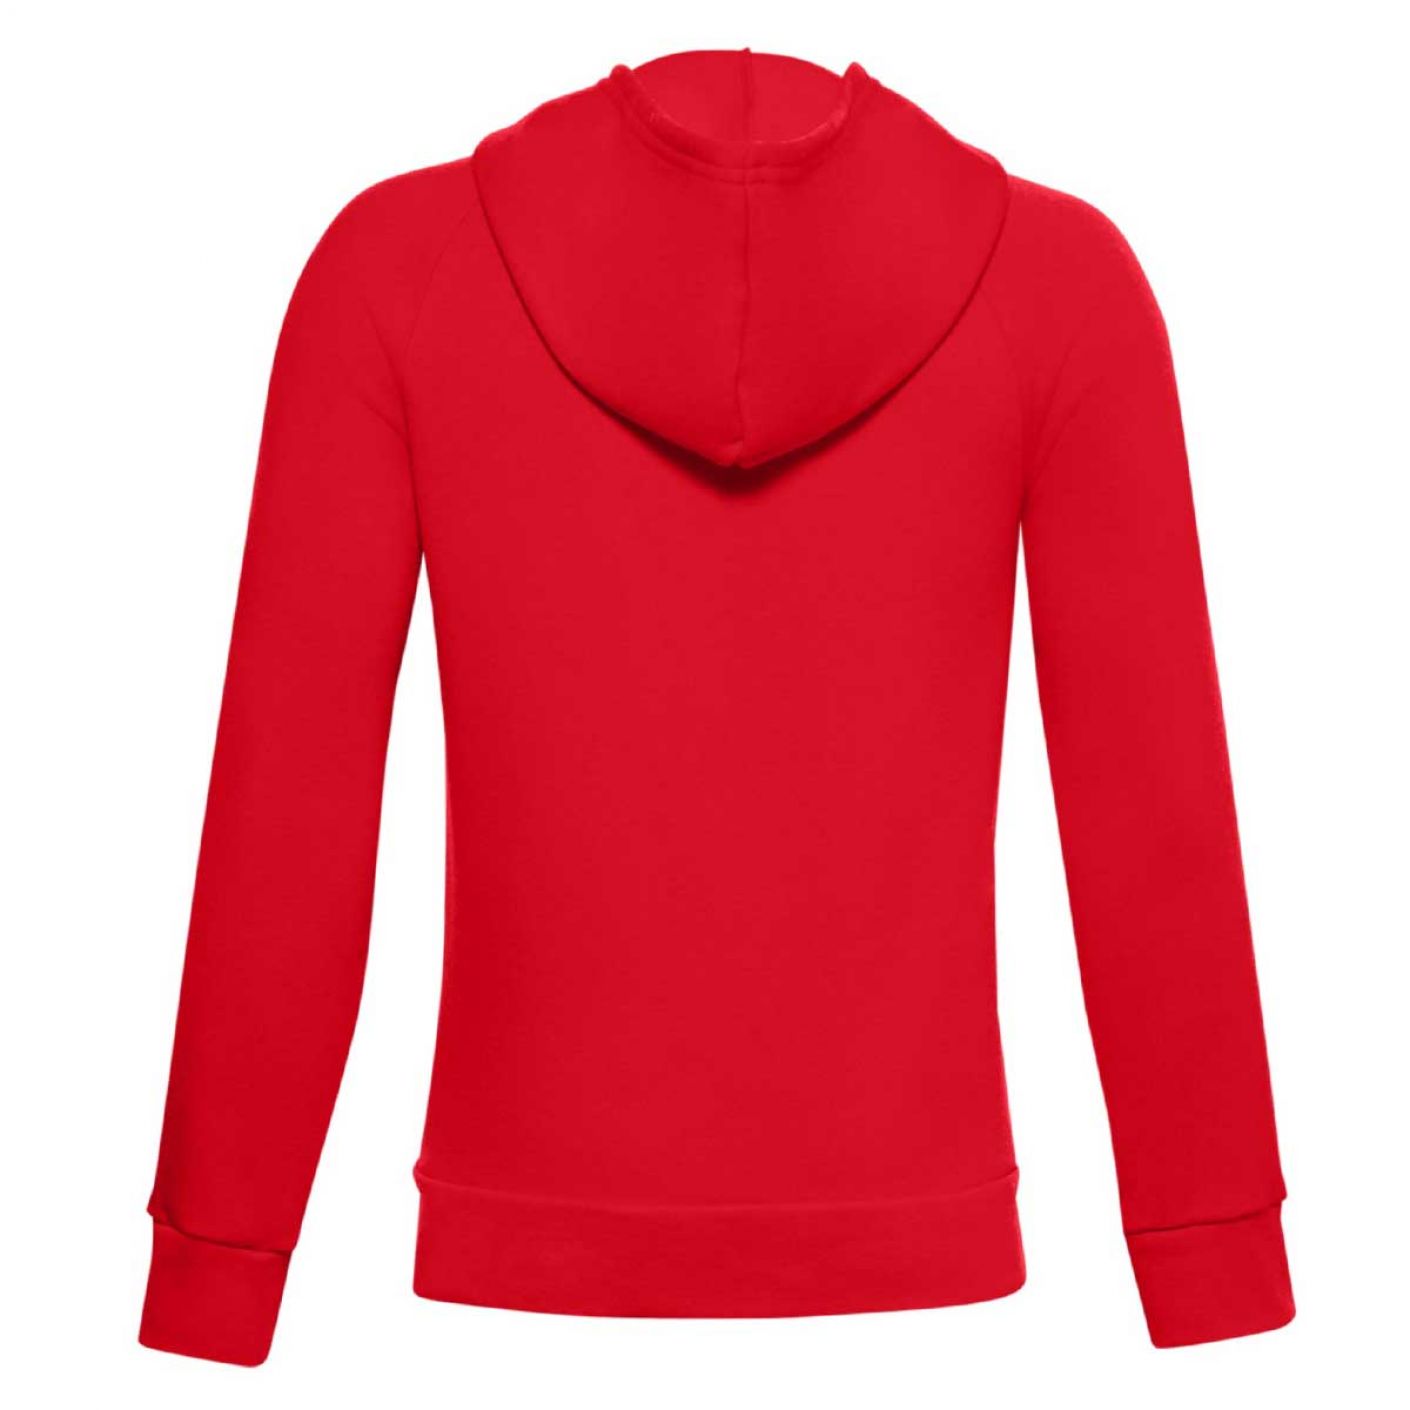 Under Armor Rival Fleece Hoodie for Boys Red